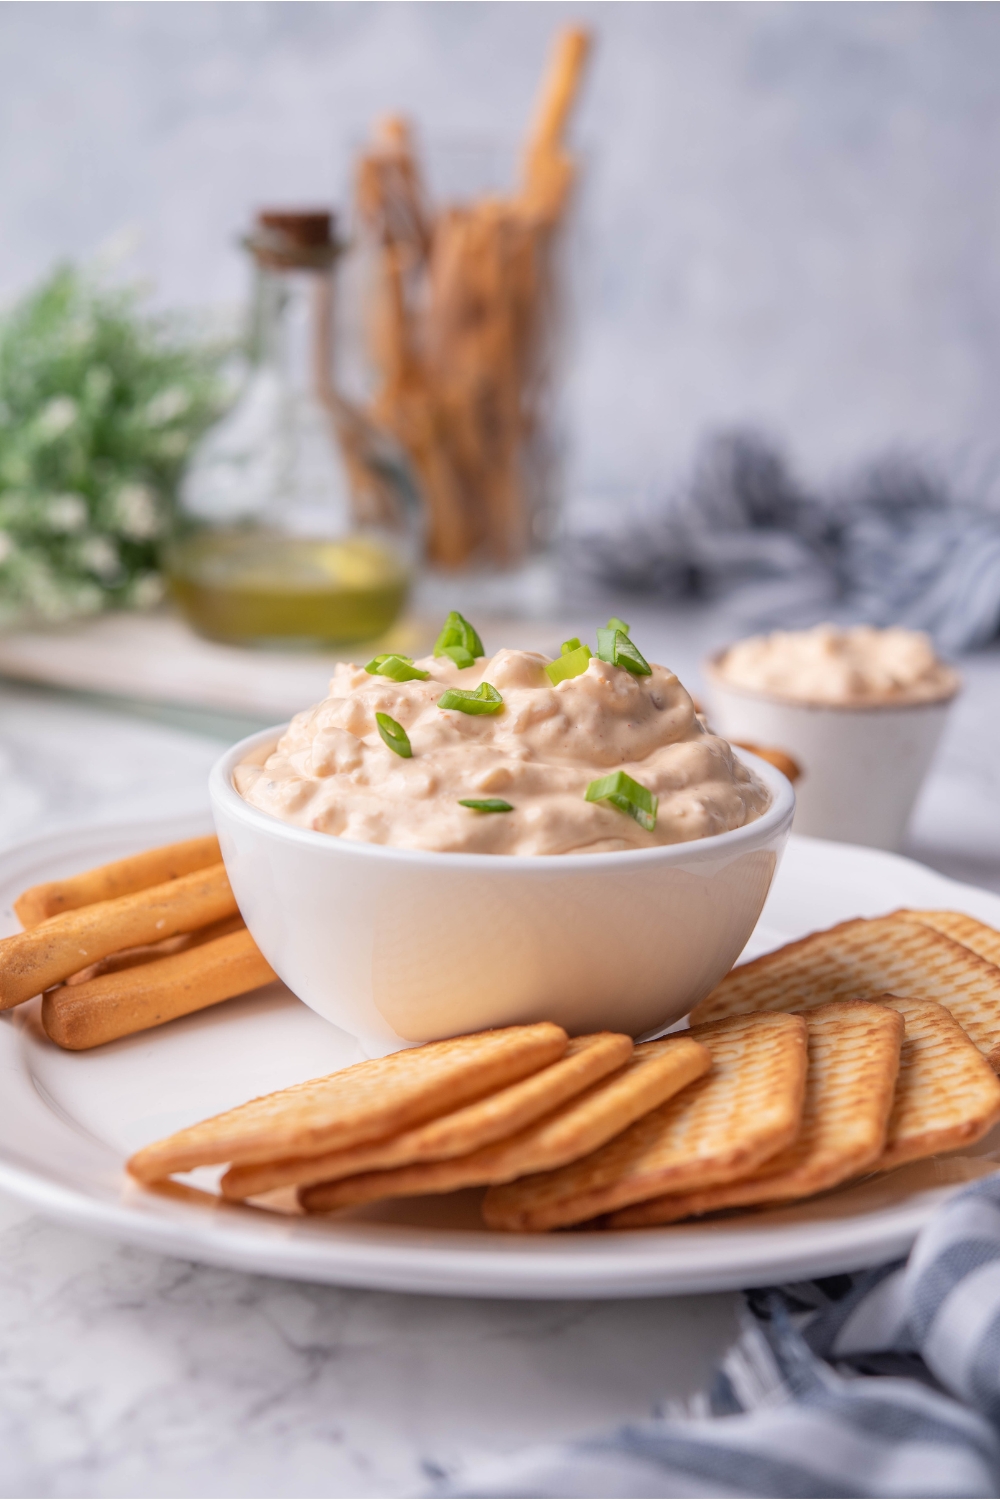 Shrimp dip garnished with diced green onion in a white bowl atop a white plate filled with crackers.